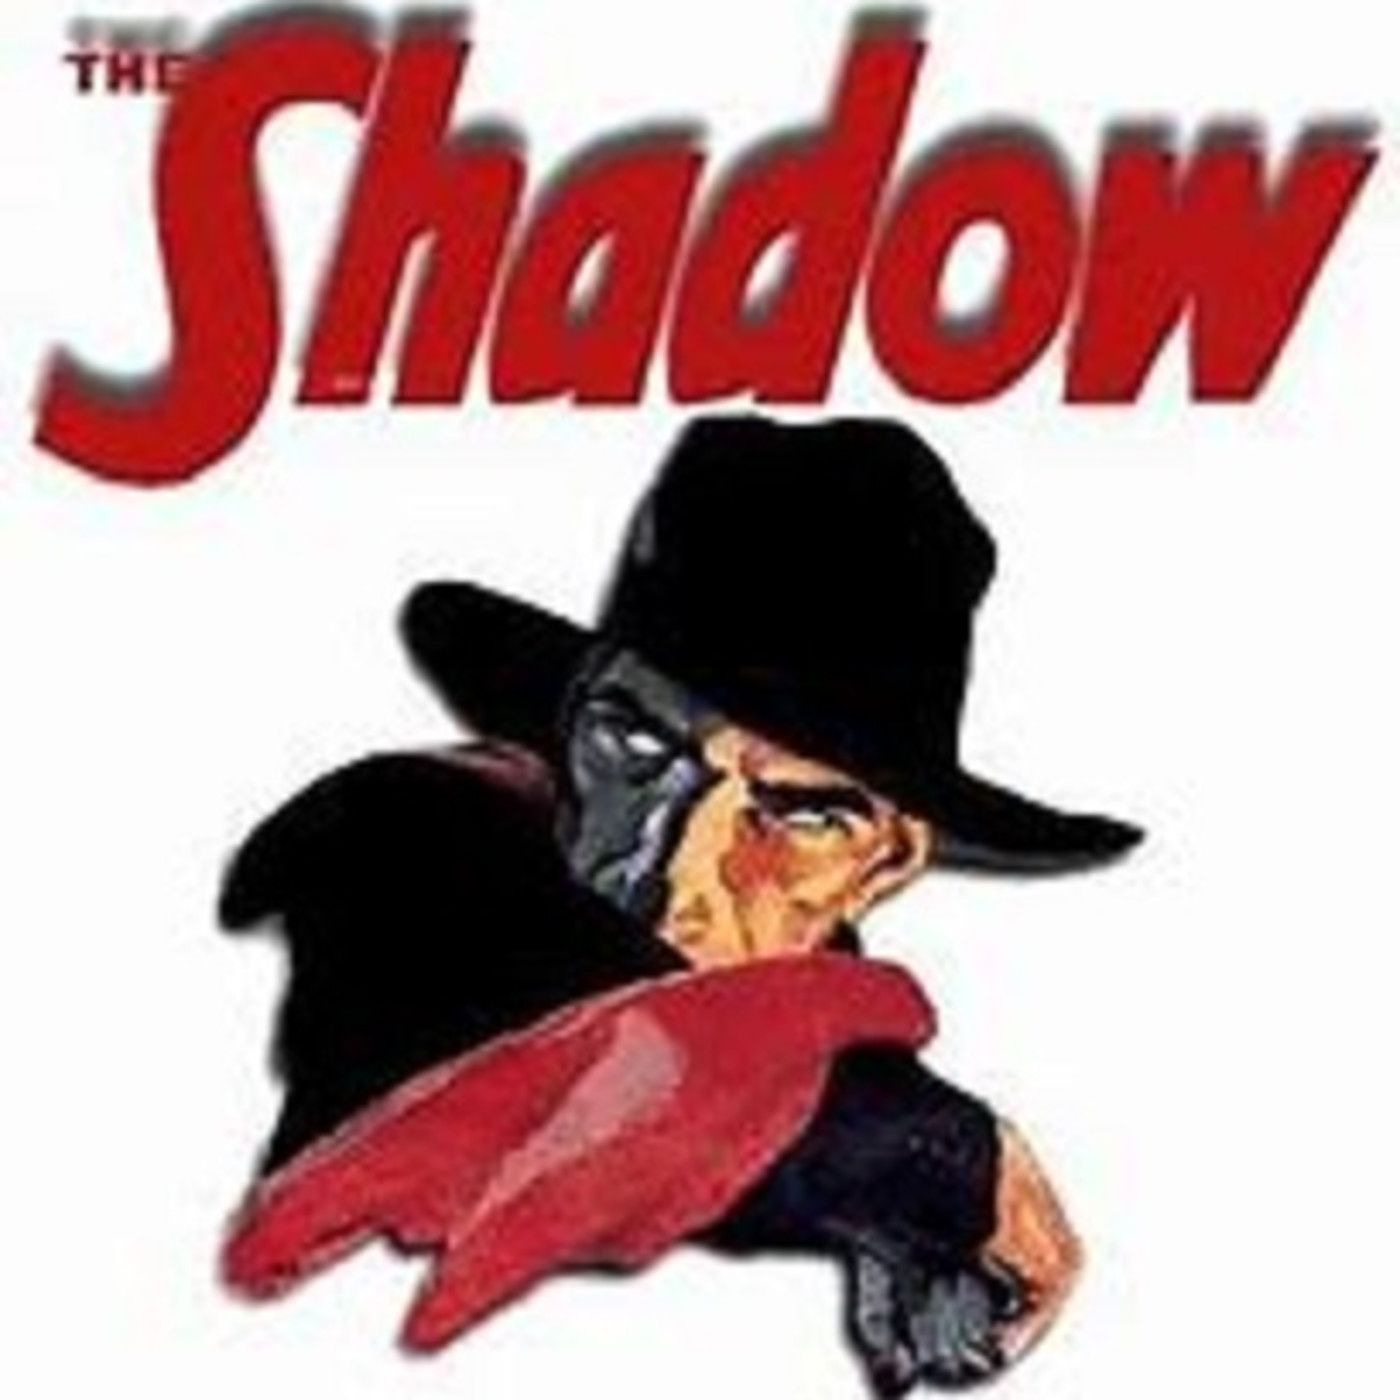 1941-0105 - The Leopard Strikes - 00 - The Shadow